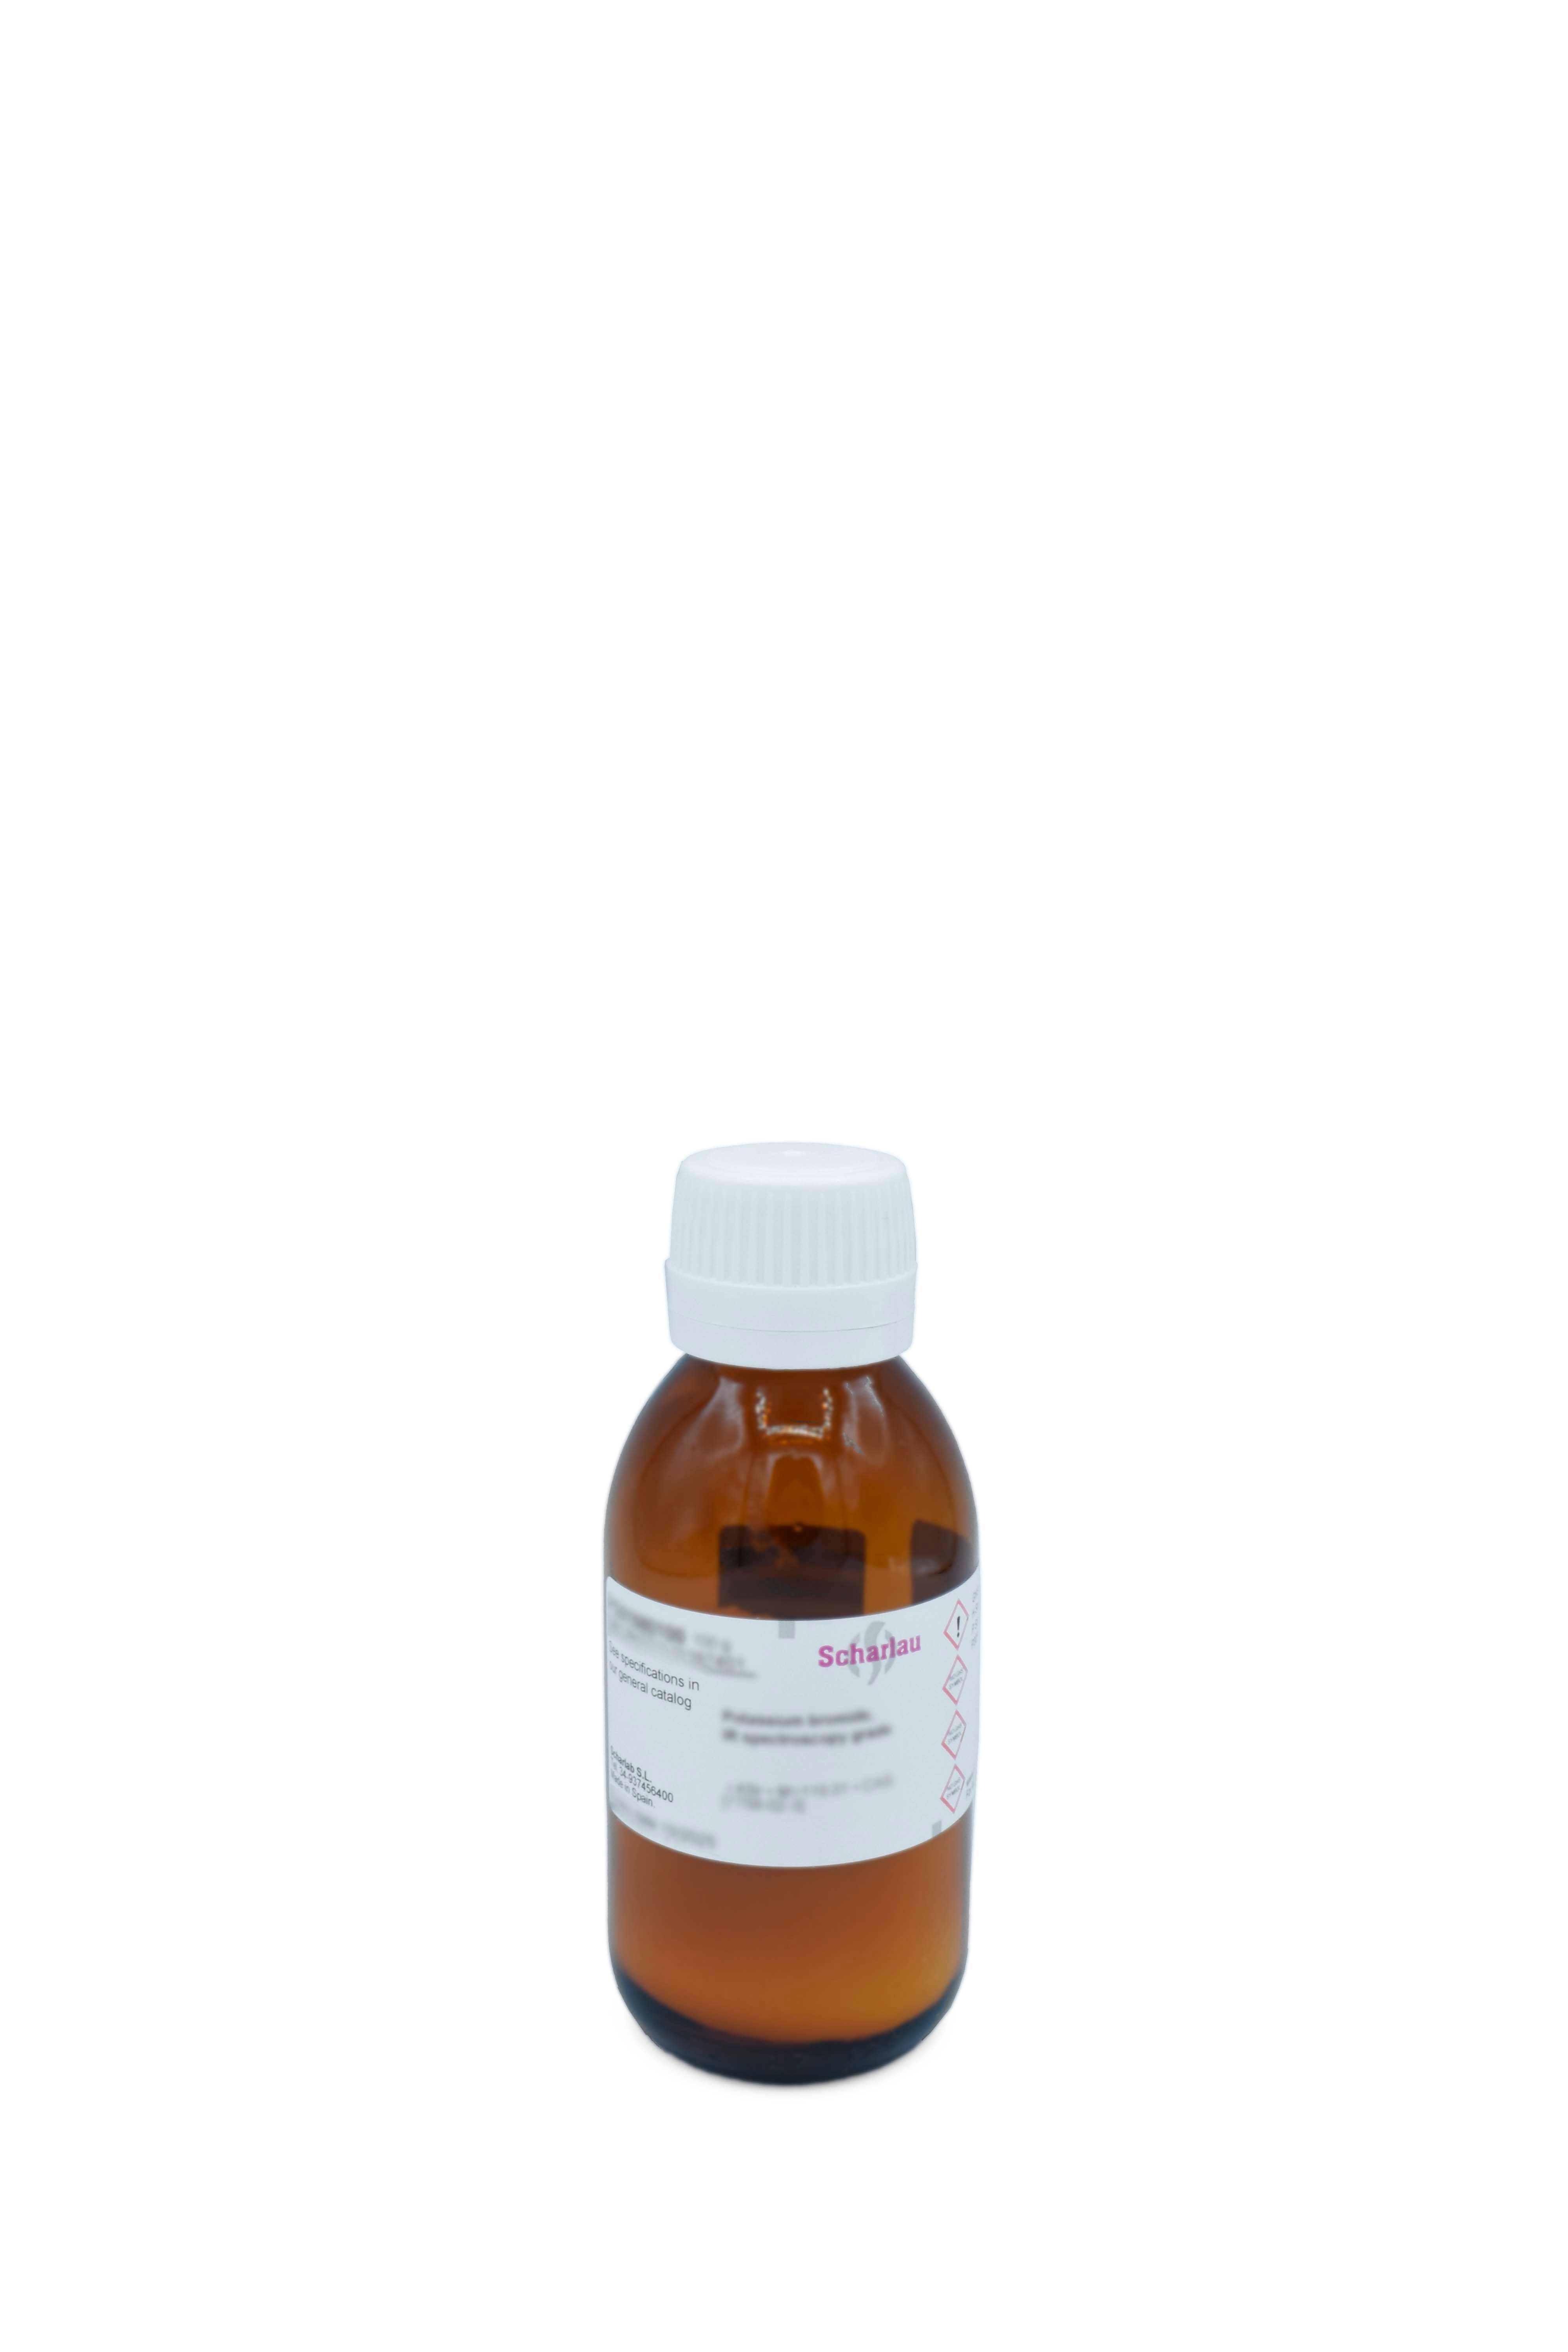 Orcein, solution B, for microscopy, Natural red 28